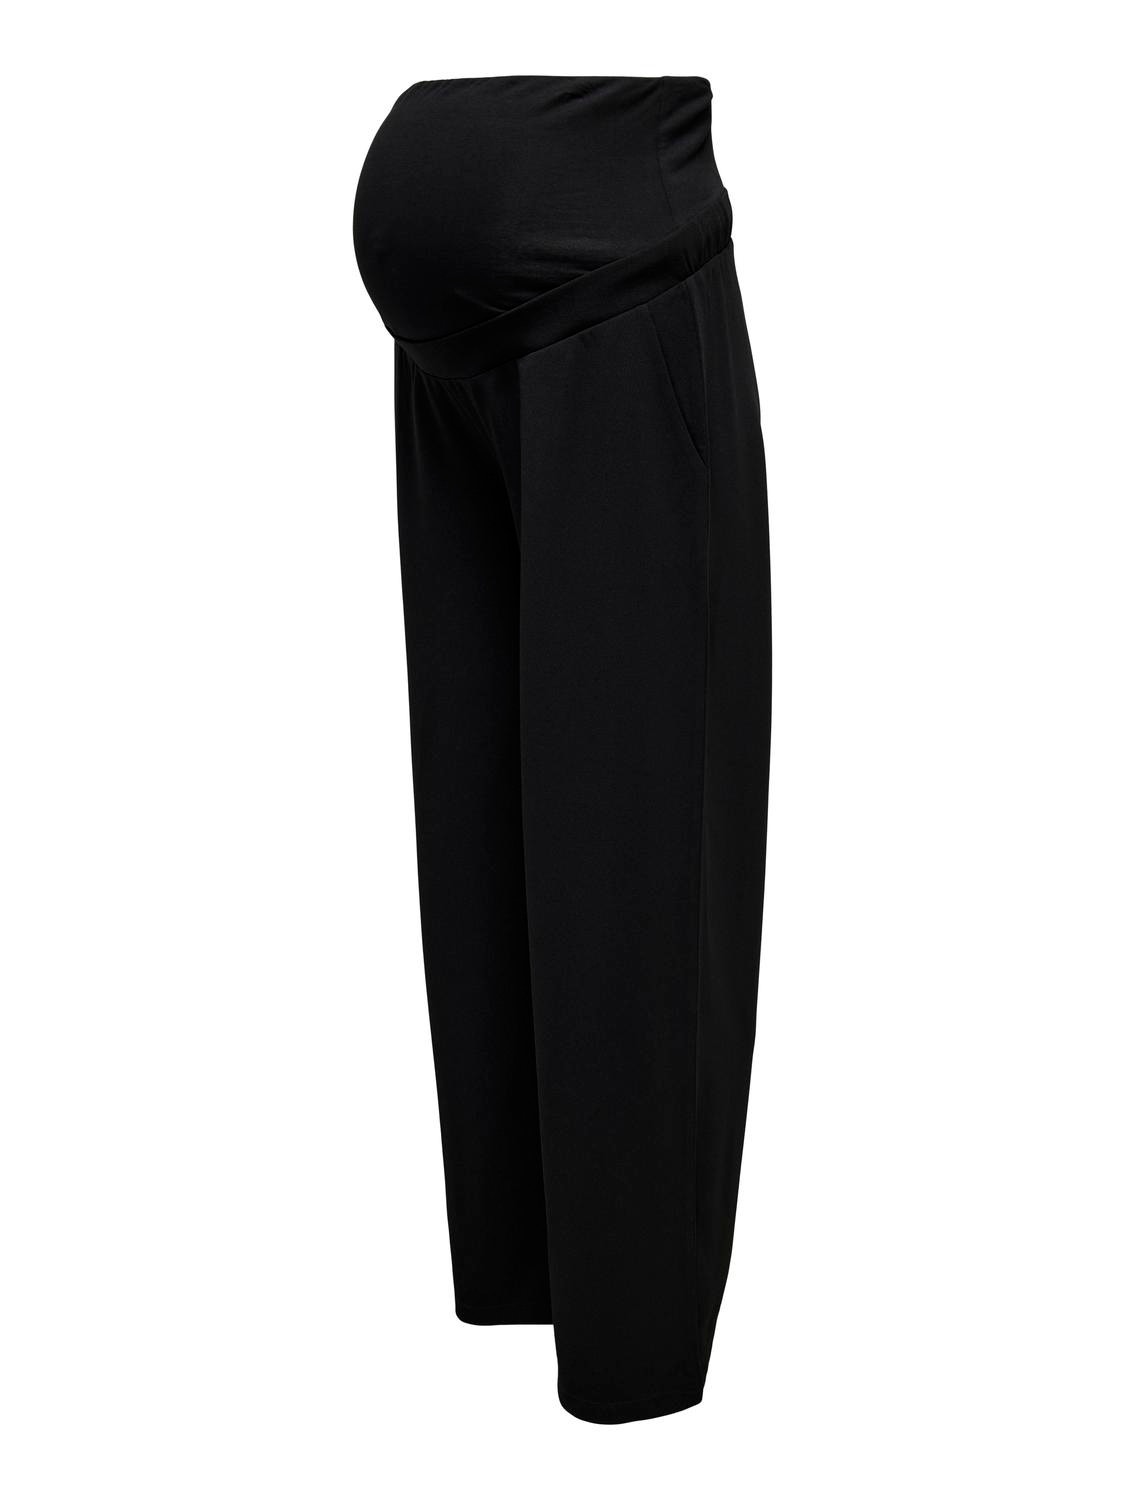 ONLY Regular Fit Maternity Trousers -Black - 15326200